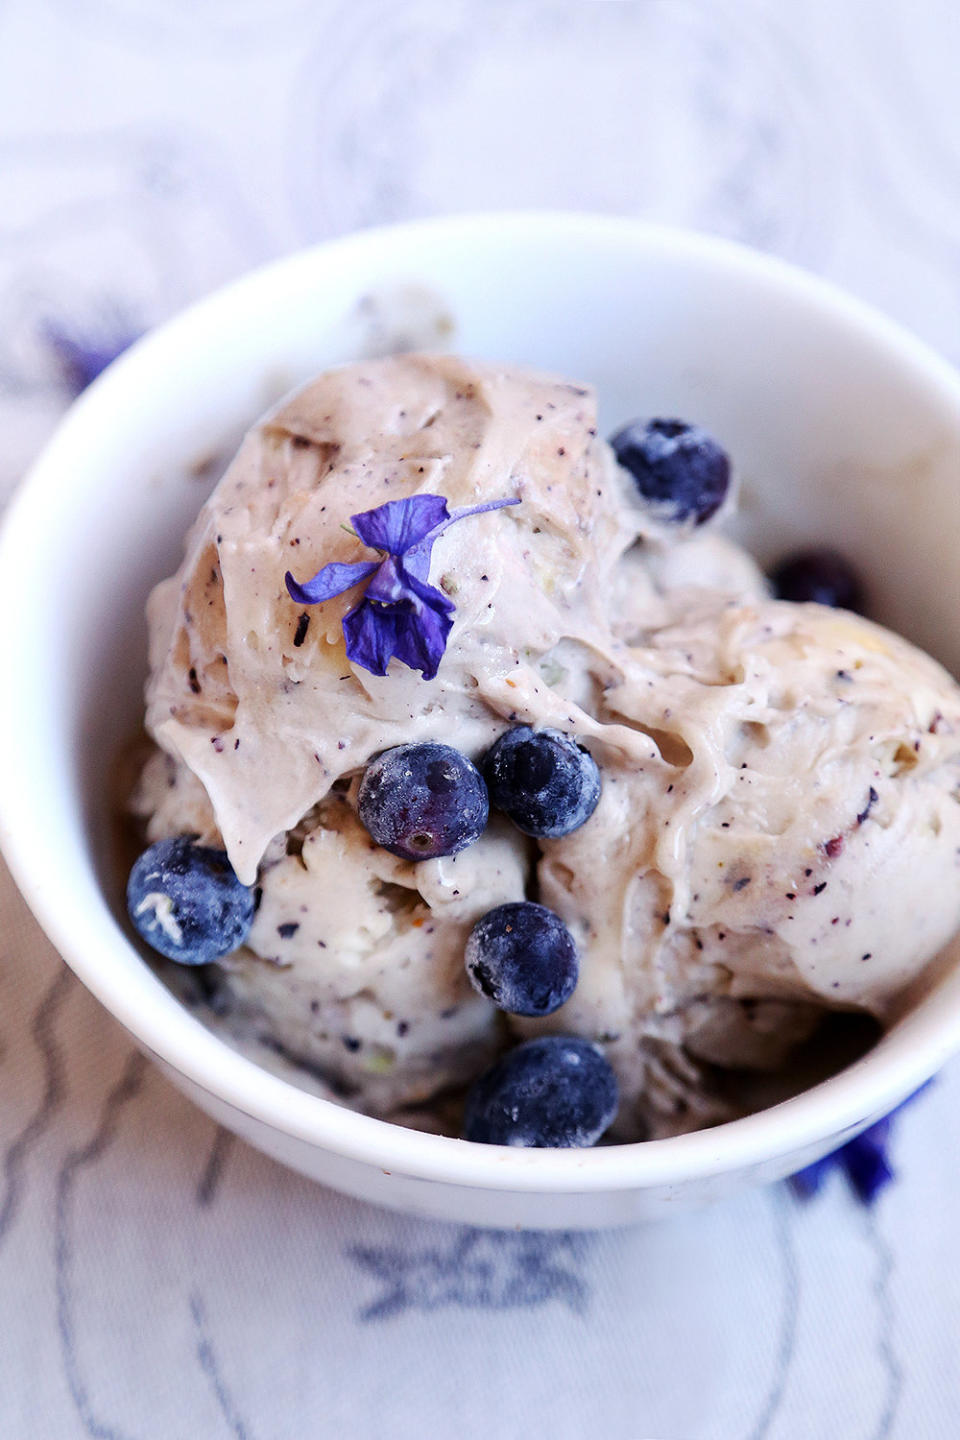 <strong>Get the <a href="http://divinehealthyfood.com/blueberry-banana-ice-cream/" target="_blank">Blueberry Banana Ice Cream recipe</a> from Divine Healthy Food</strong>